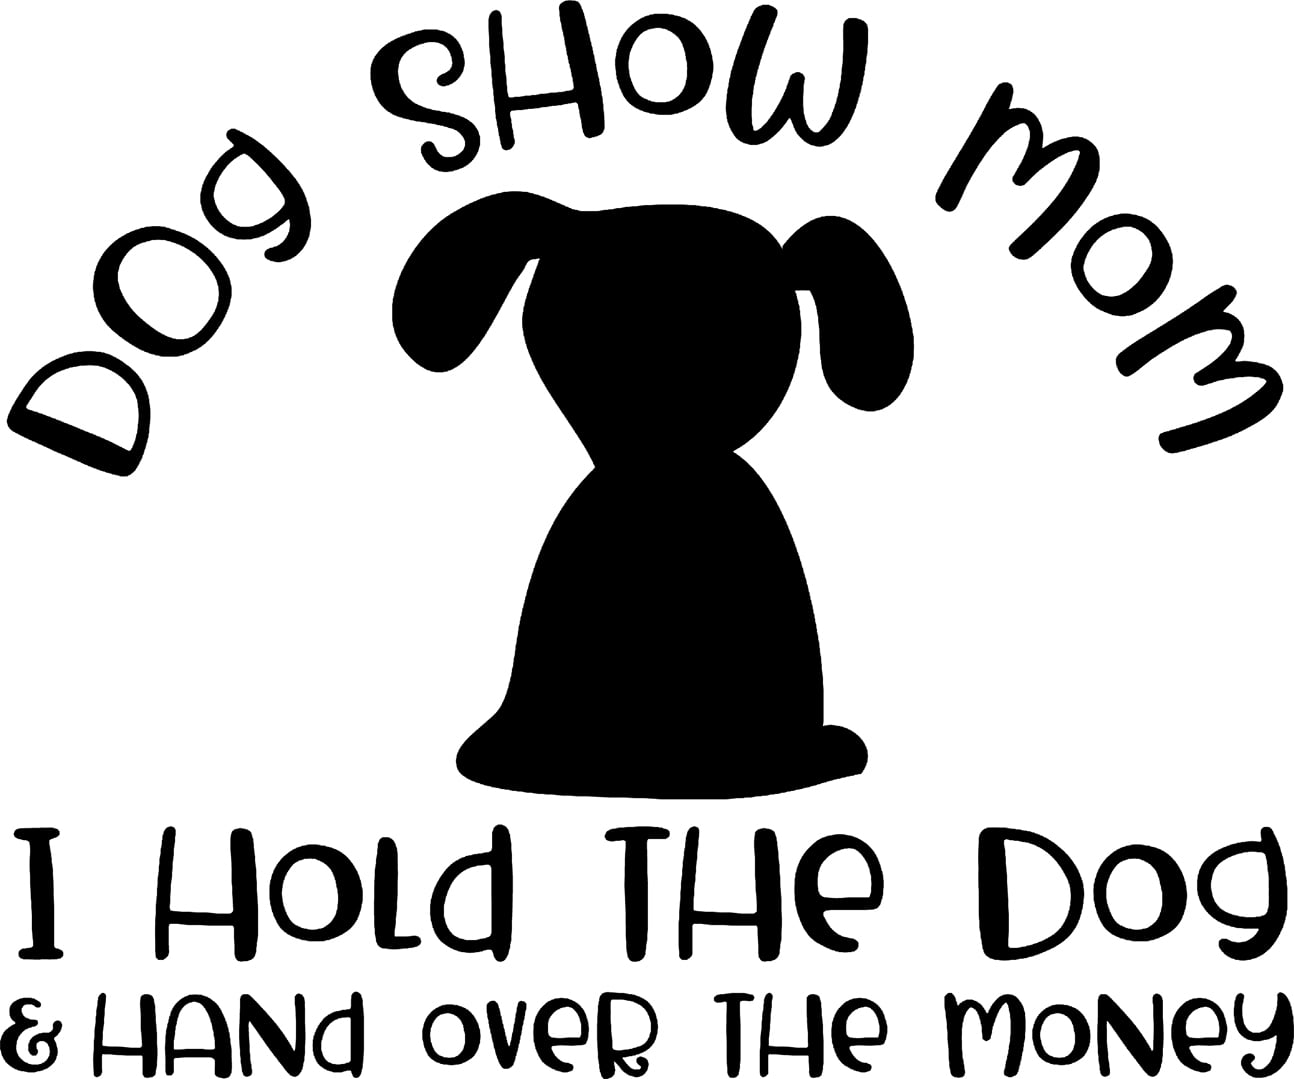 Mom Hold The Dog Hand Over The Money Funny Competition Wall Decals for  Walls Peel and Stick wall art murals Black Small 8 Inch 